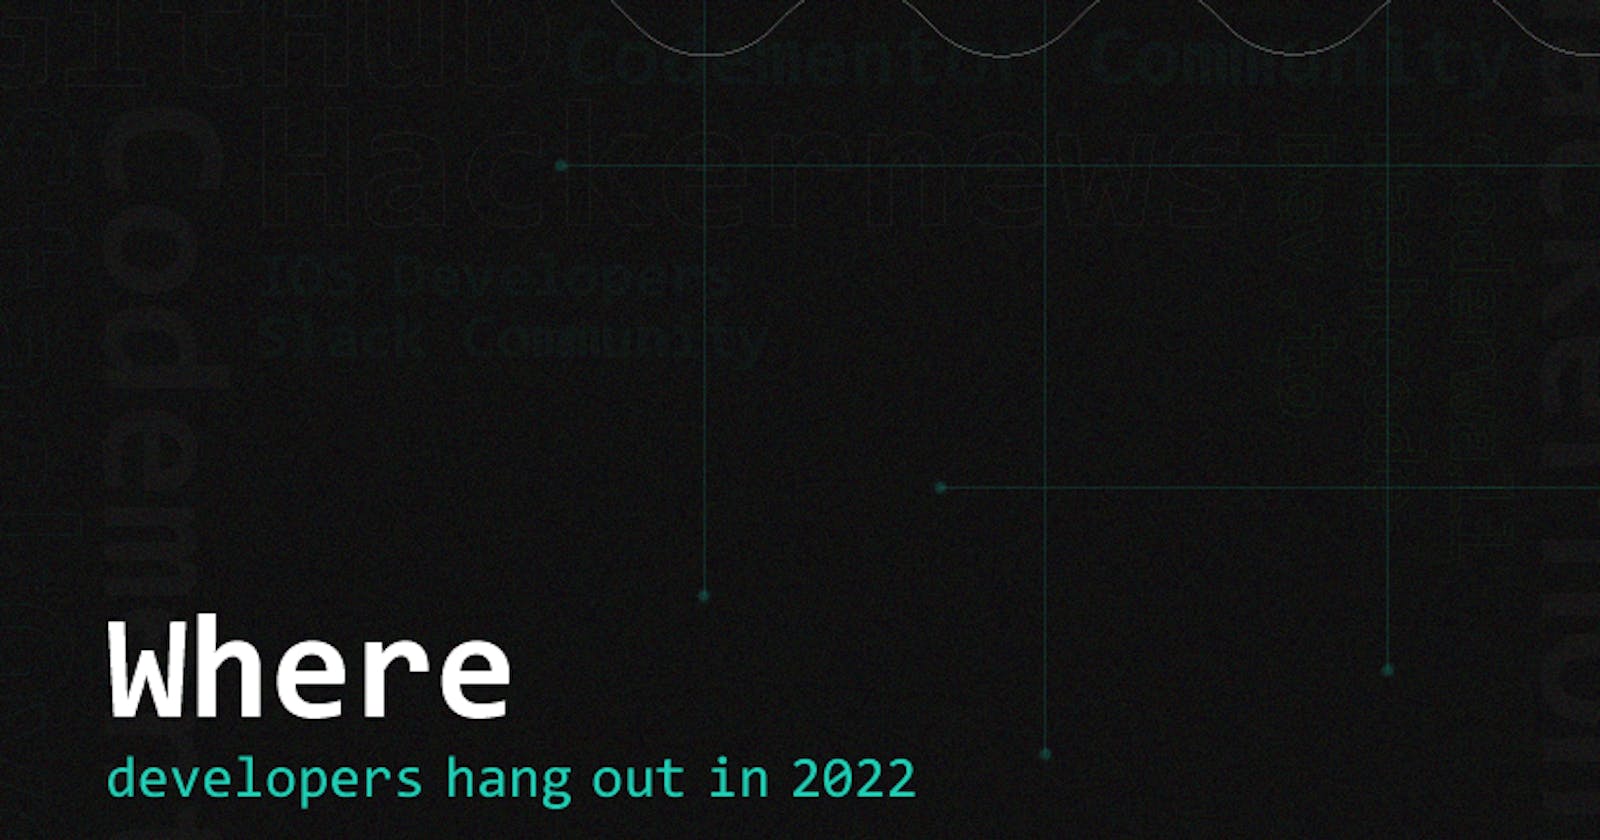 Where do developers hang out in 2022?